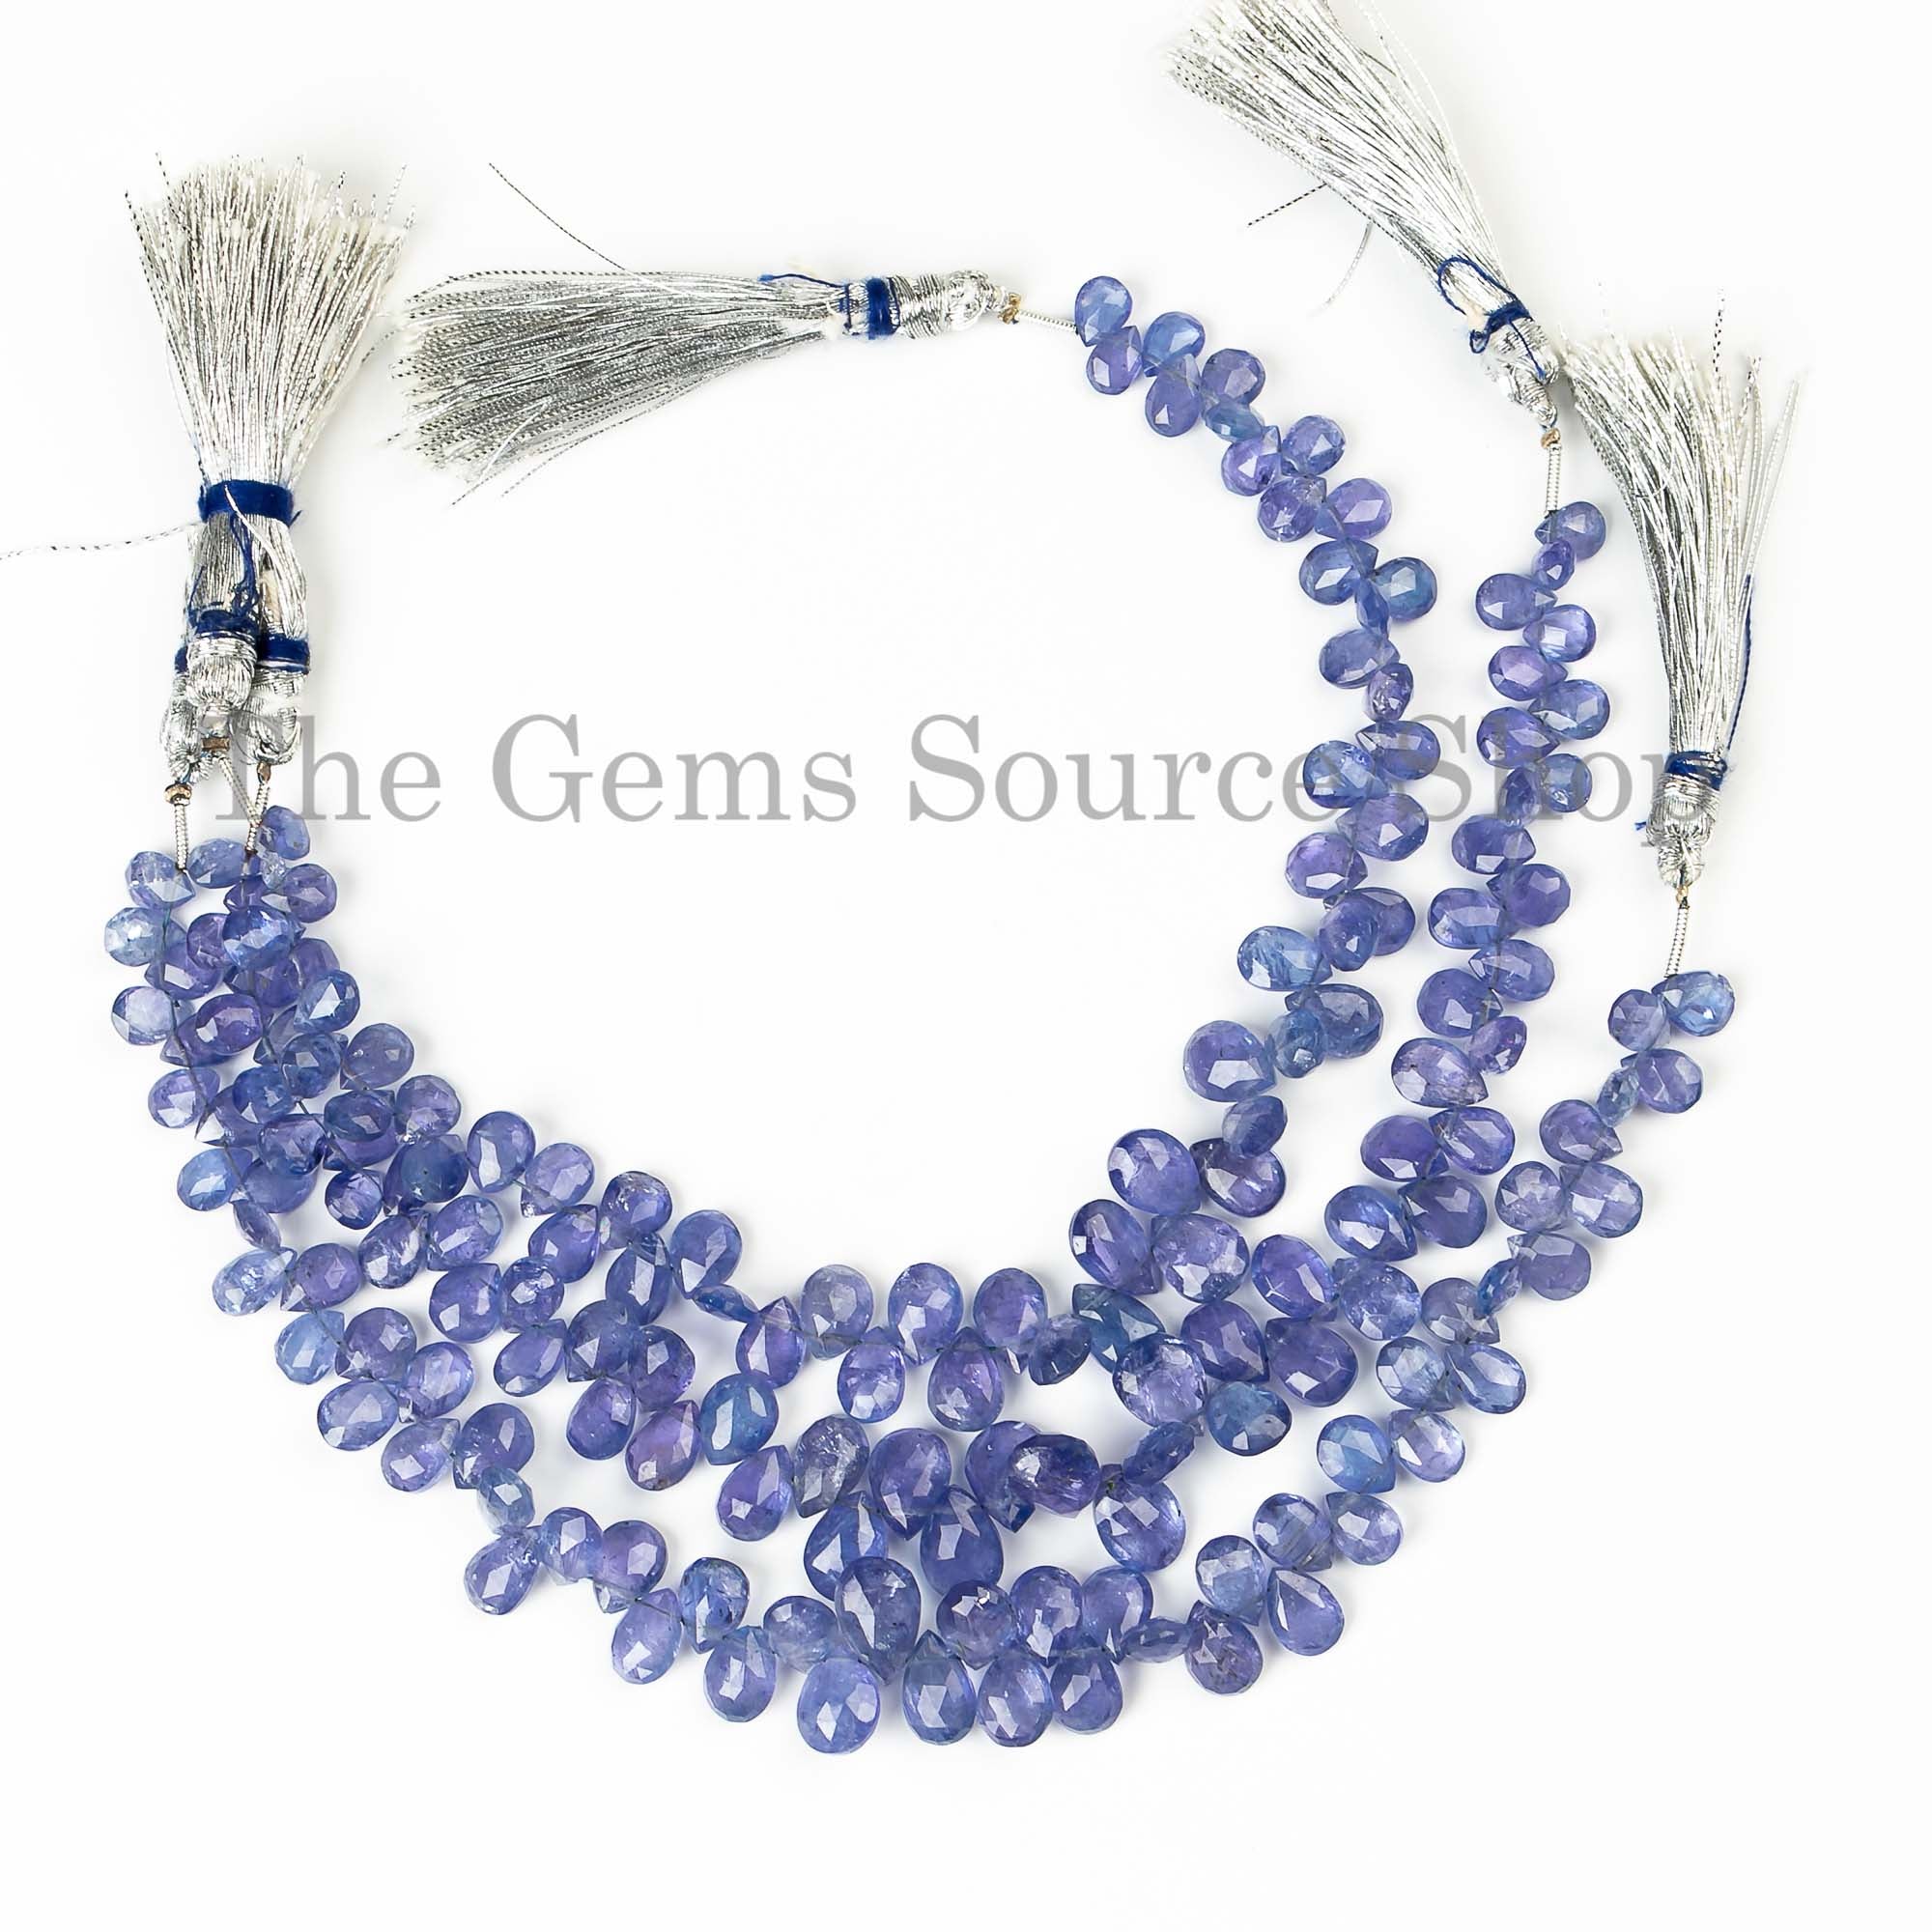 Top Quality Tanzanite Beads, Tanzanite Faceted Beads, Tanzanite Pear Shape Beads, Wholesale Beads